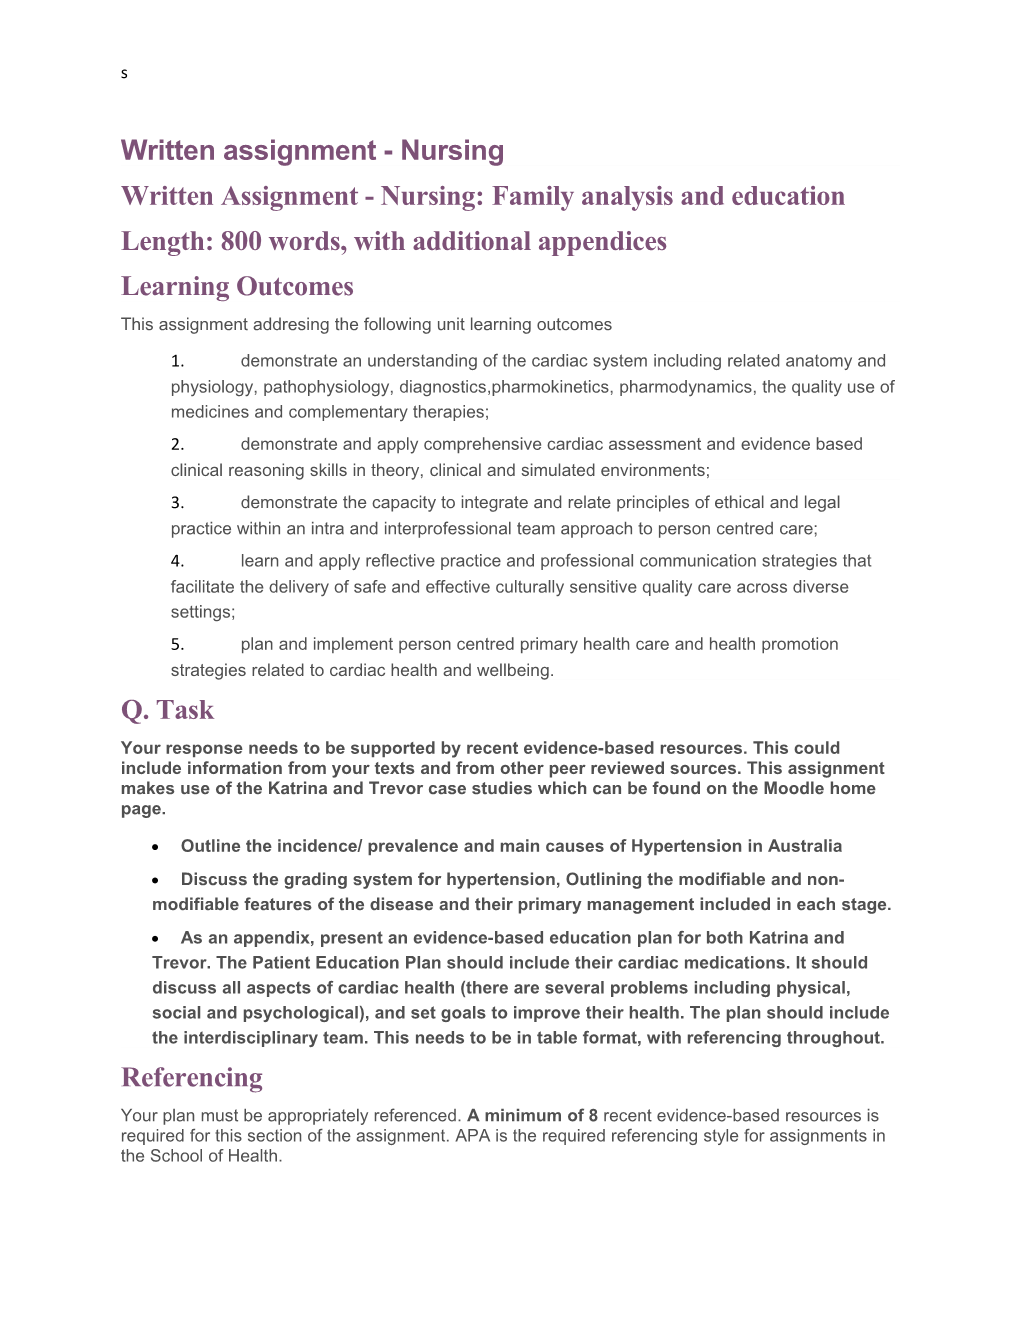 Written Assignment - Nursing:Family Analysis and Education